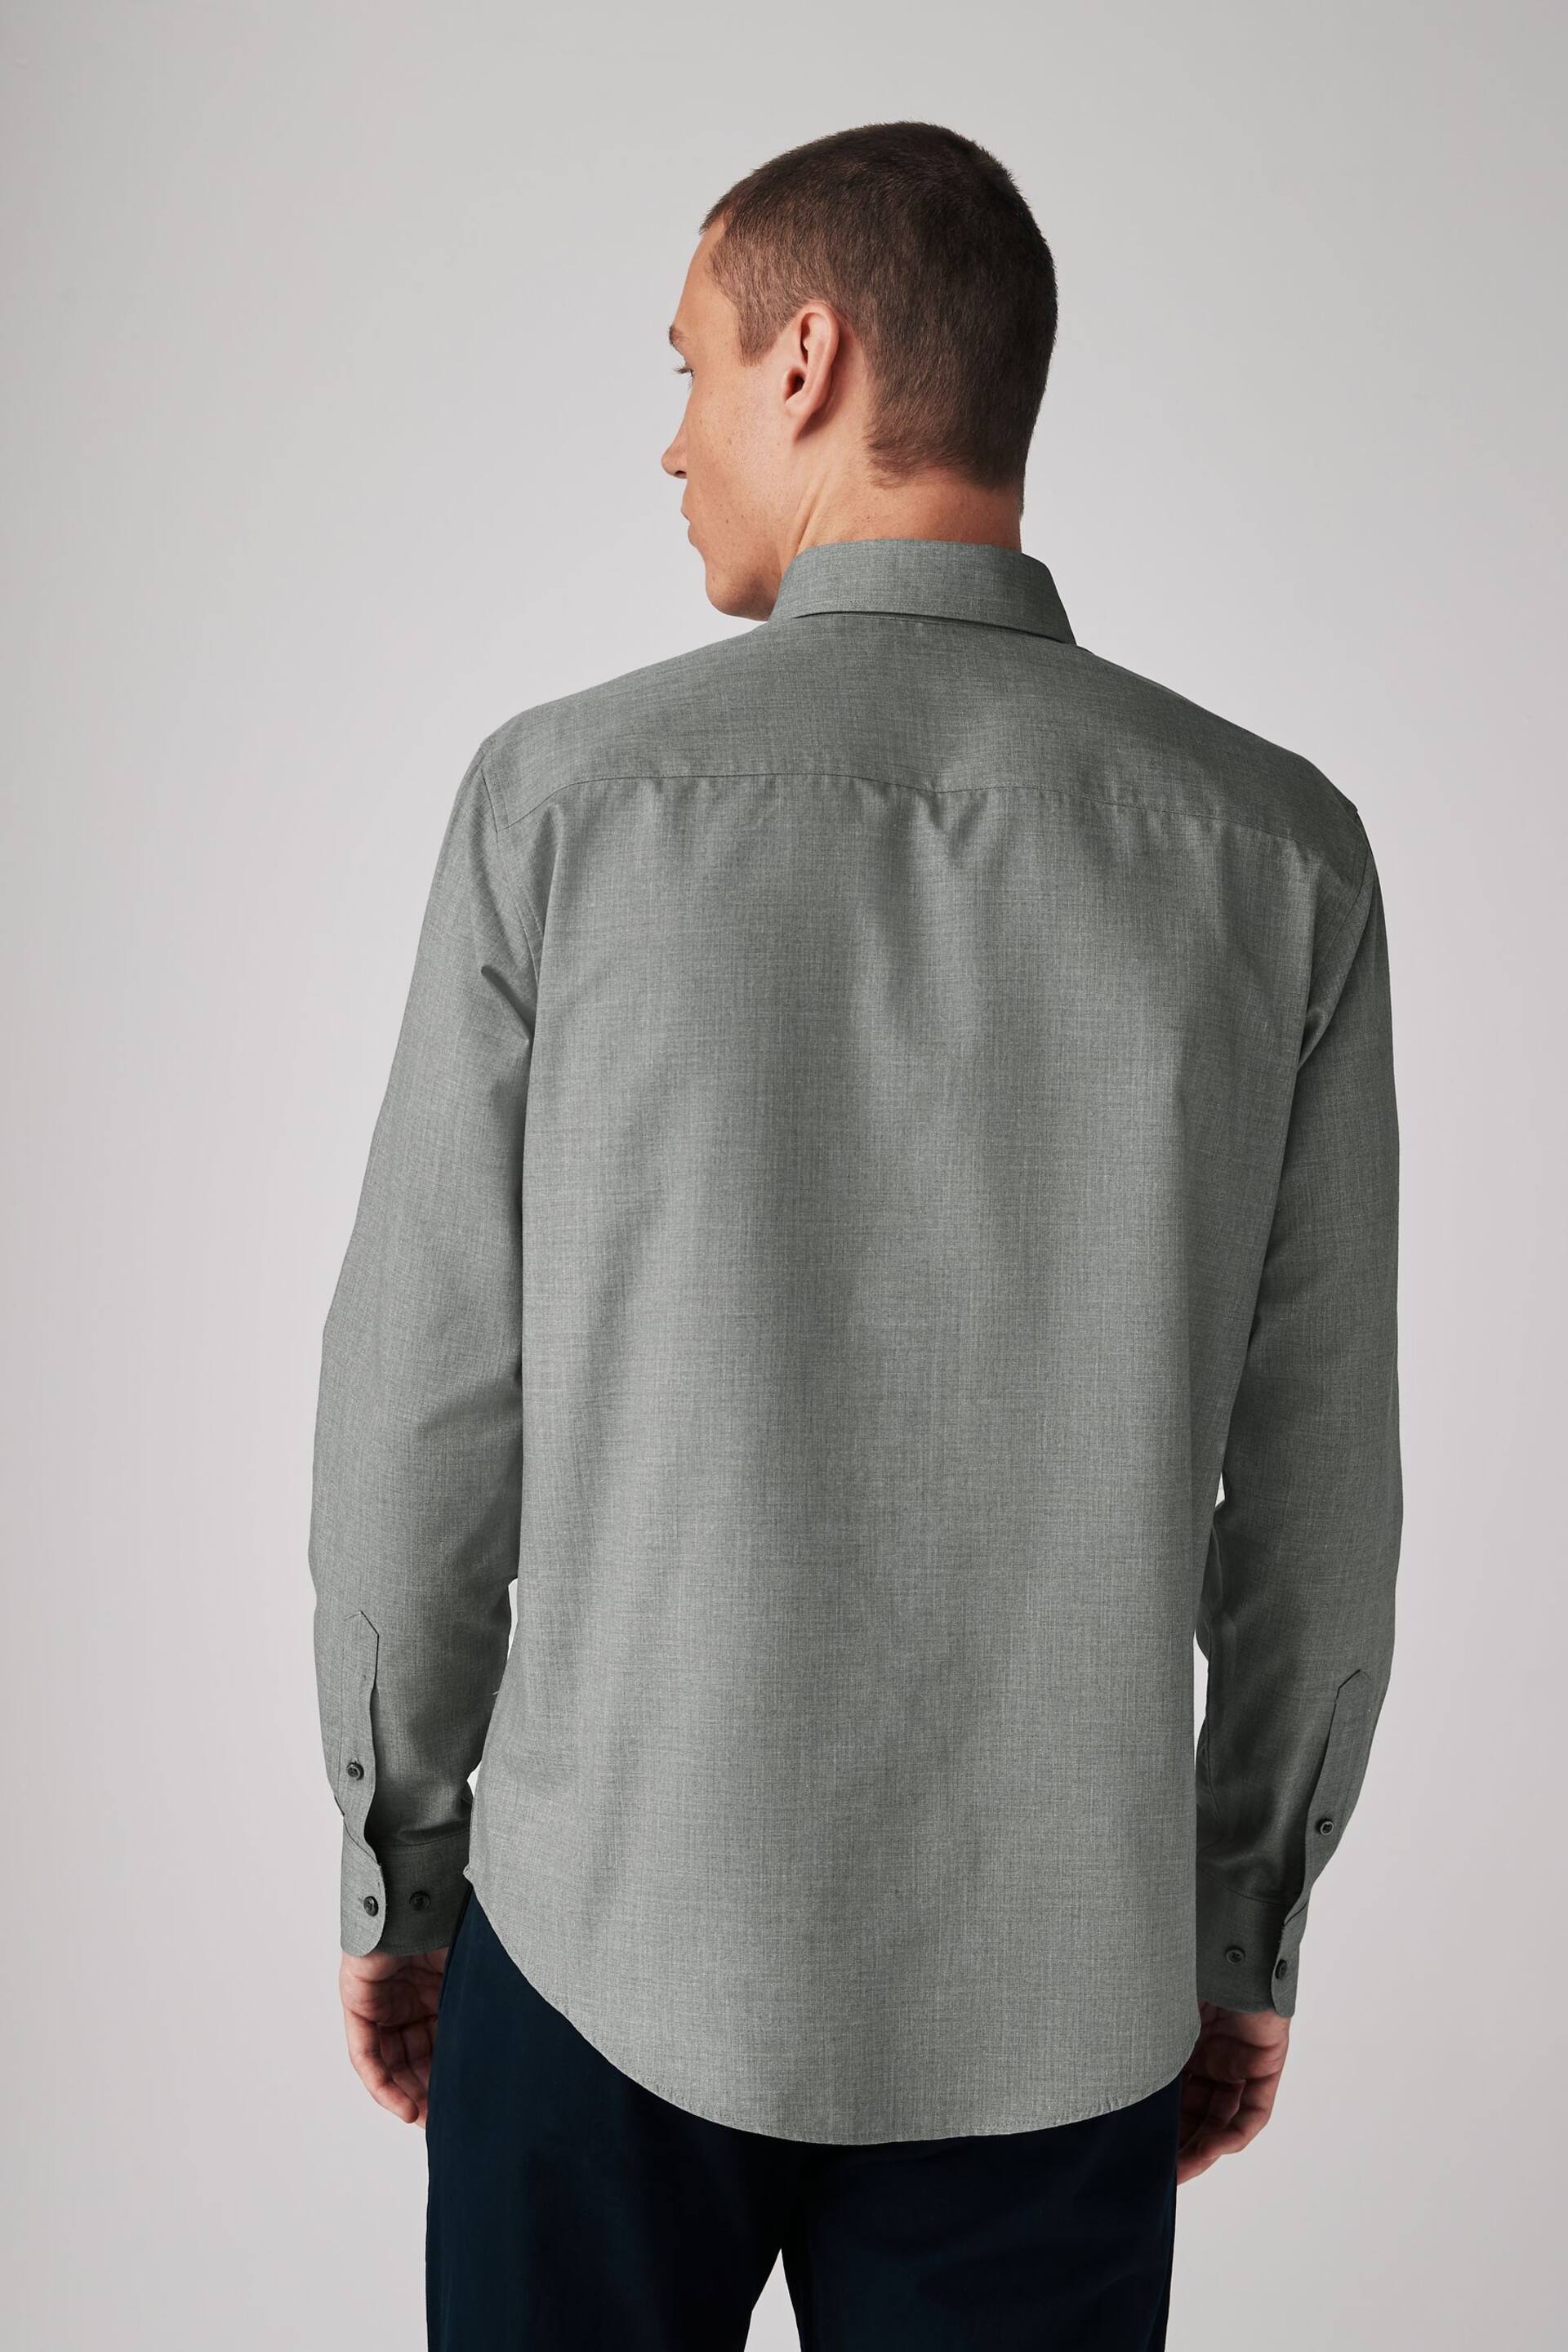 Grey Marl Regular Fit Easy Iron Button Down Oxford Shirt - Image 3 of 6